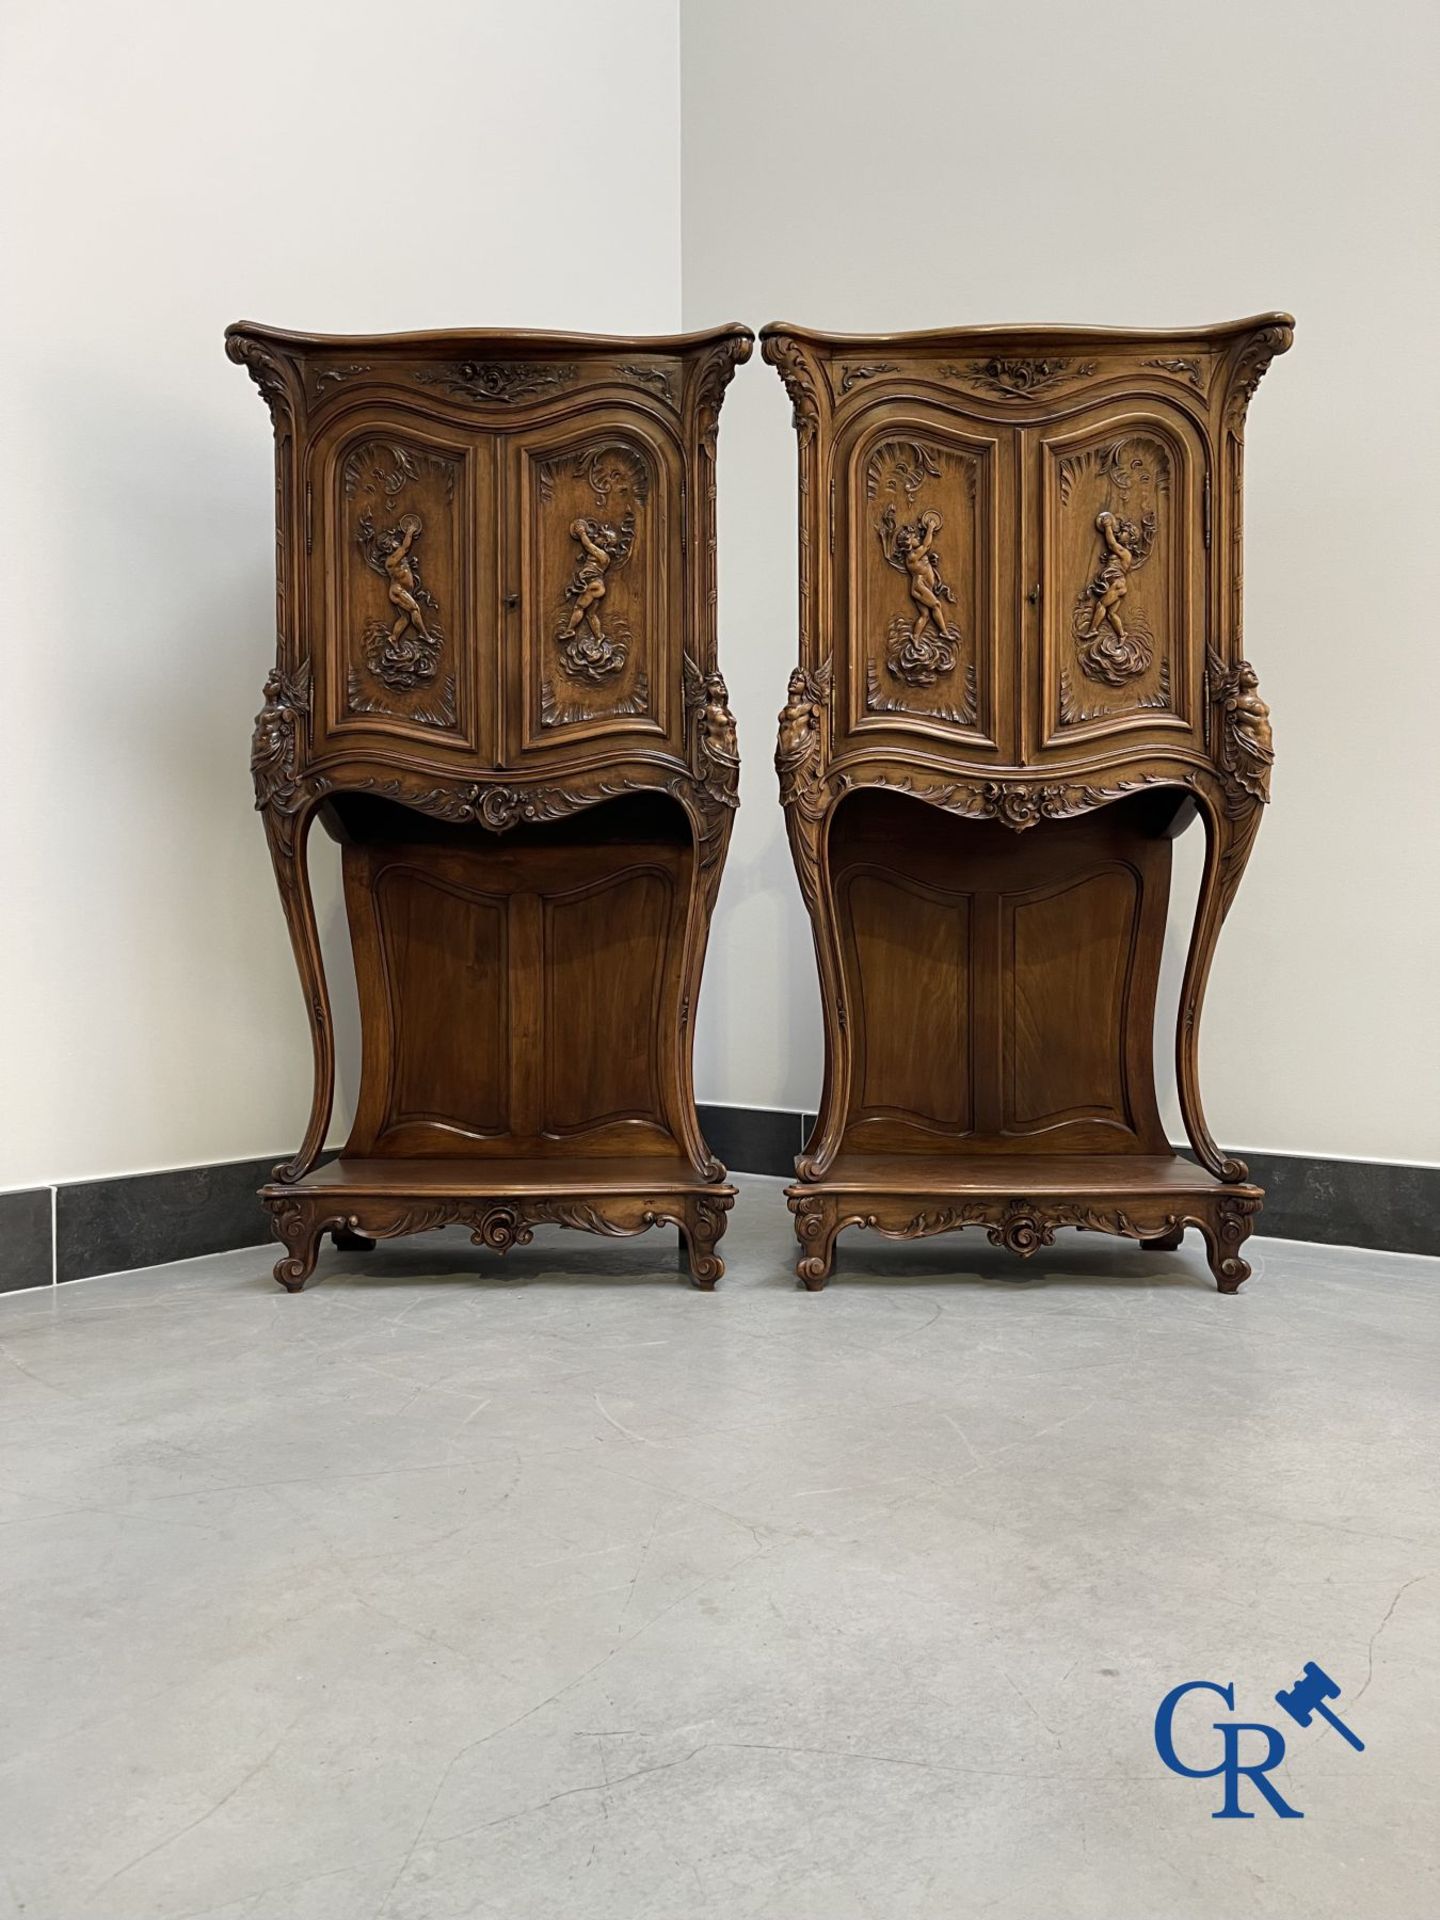 Furniture: A pair of finely carved furniture. LXV style. - Image 11 of 15